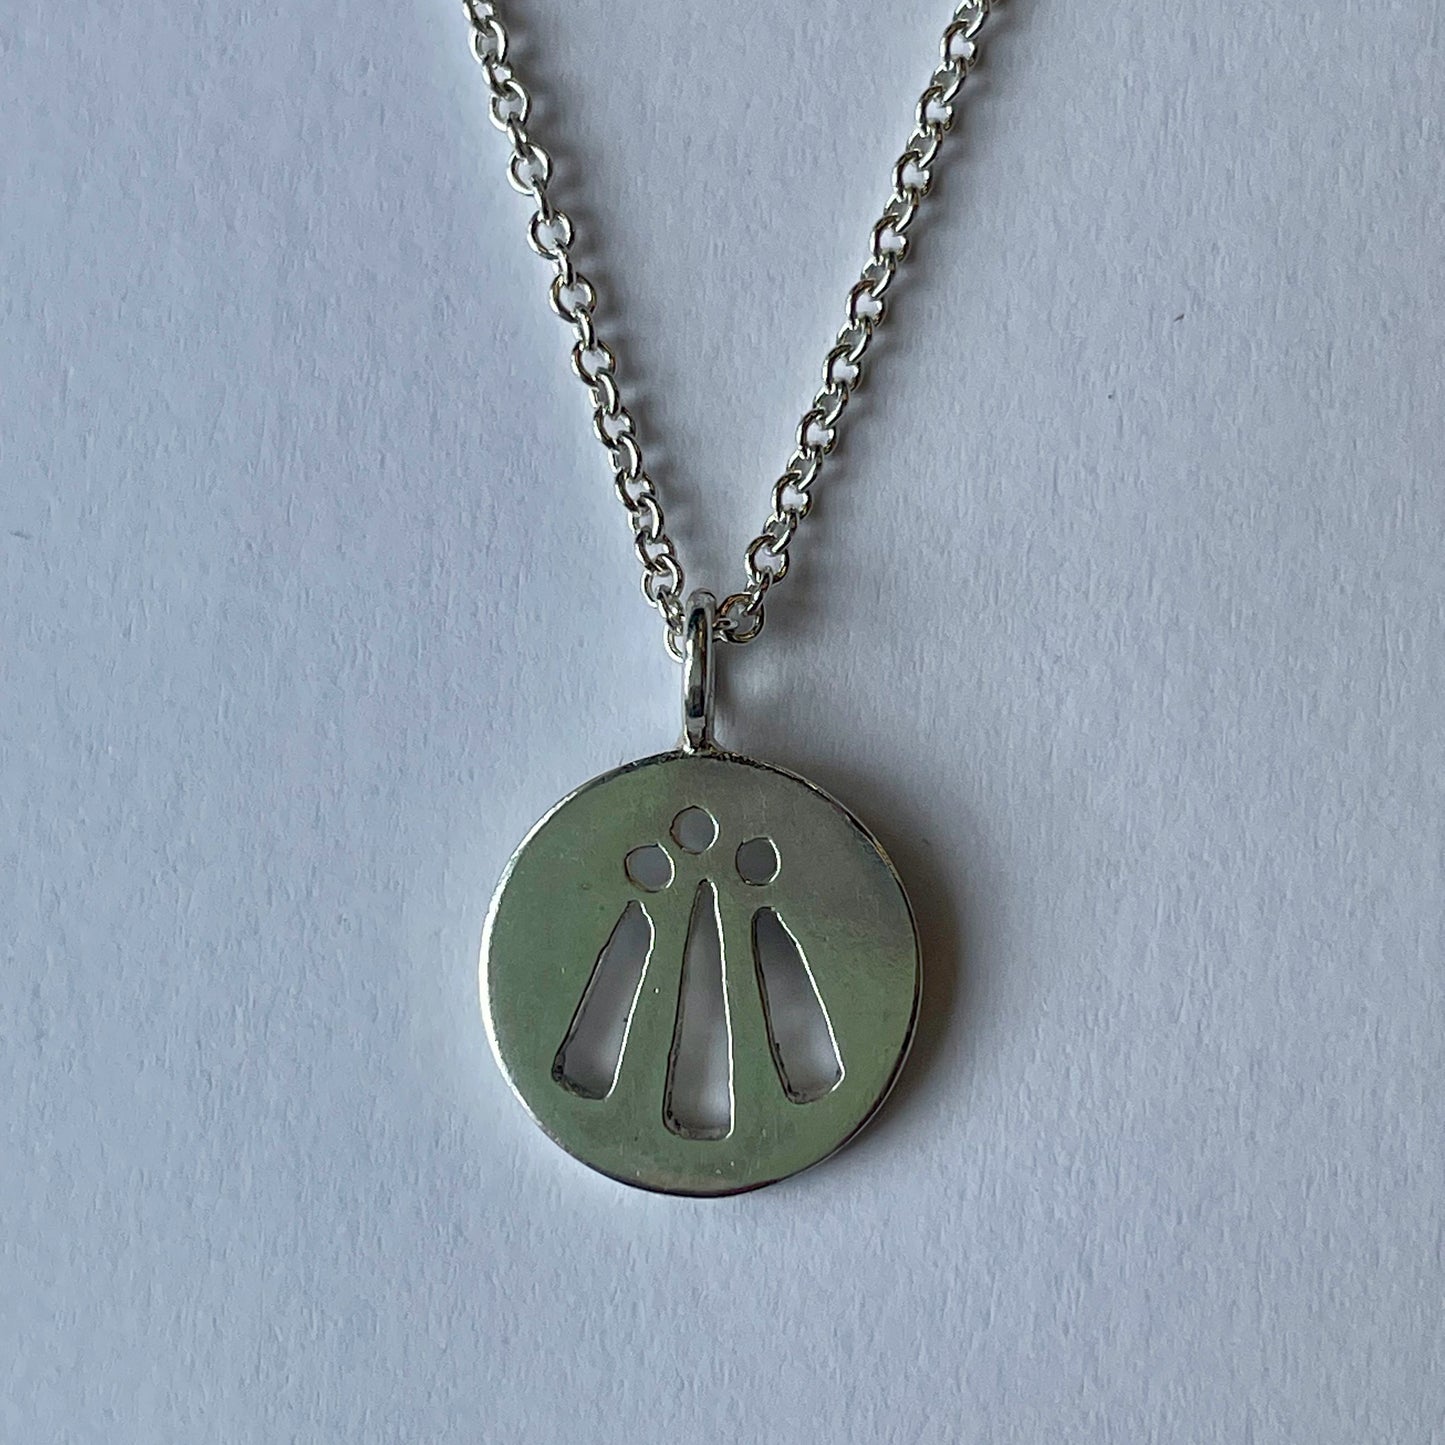 Simple Silver Awen **NEW**